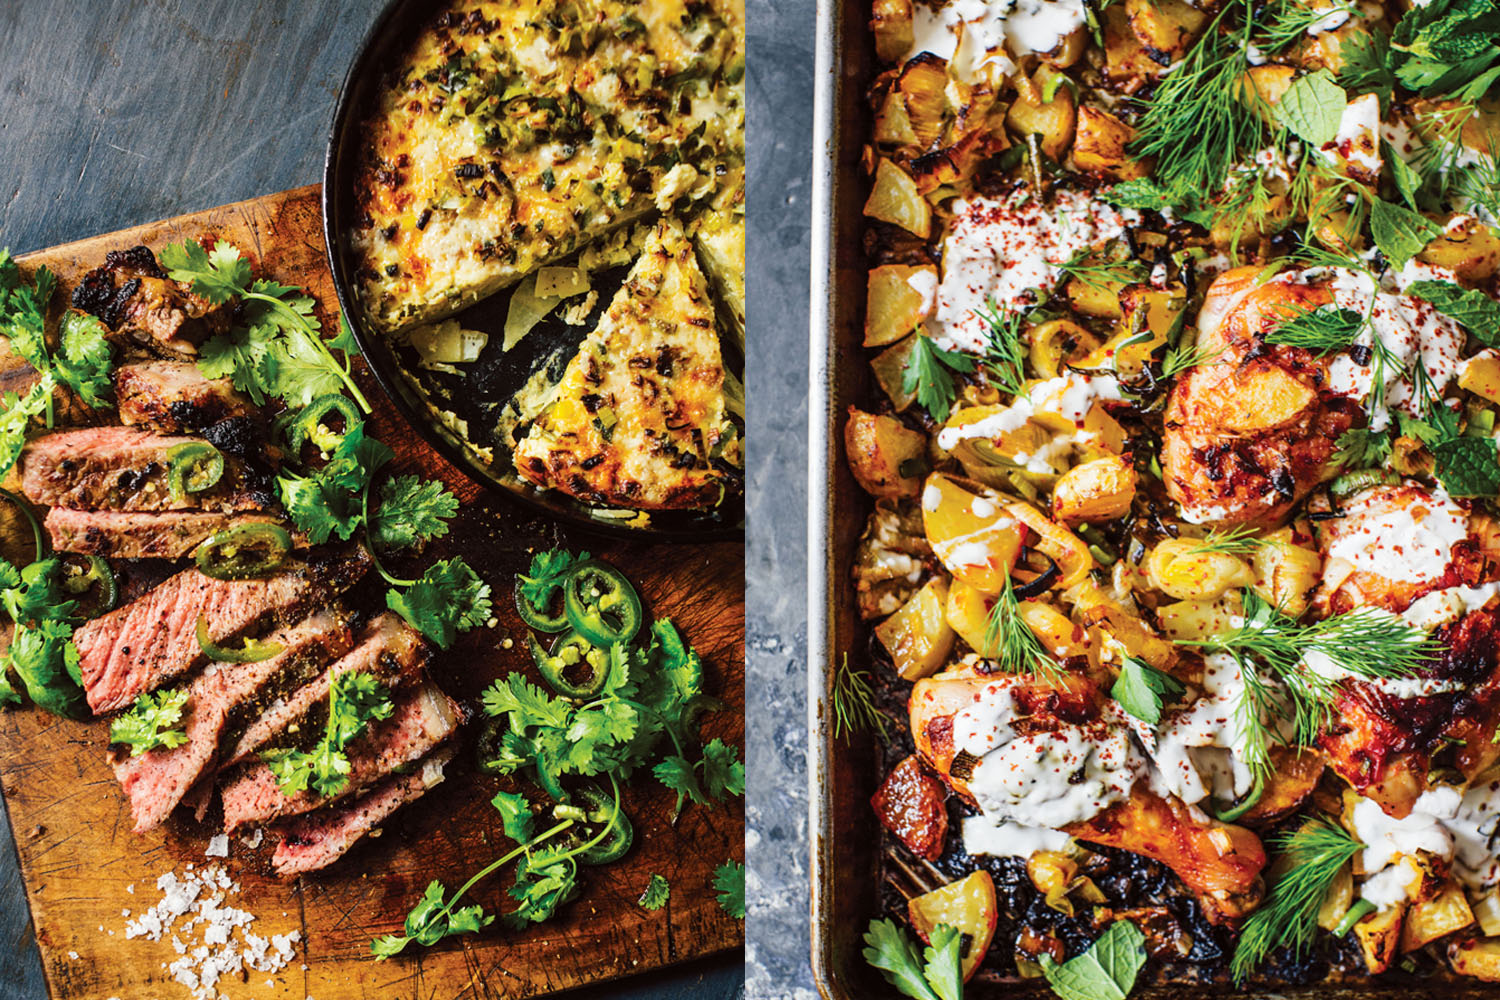 Pictures of a jalapeno-honey steak and harissa chicken from Melissa Clark's new cookbook, &quot;Dinner.&quot; (Courtesy Clarkson Potter)